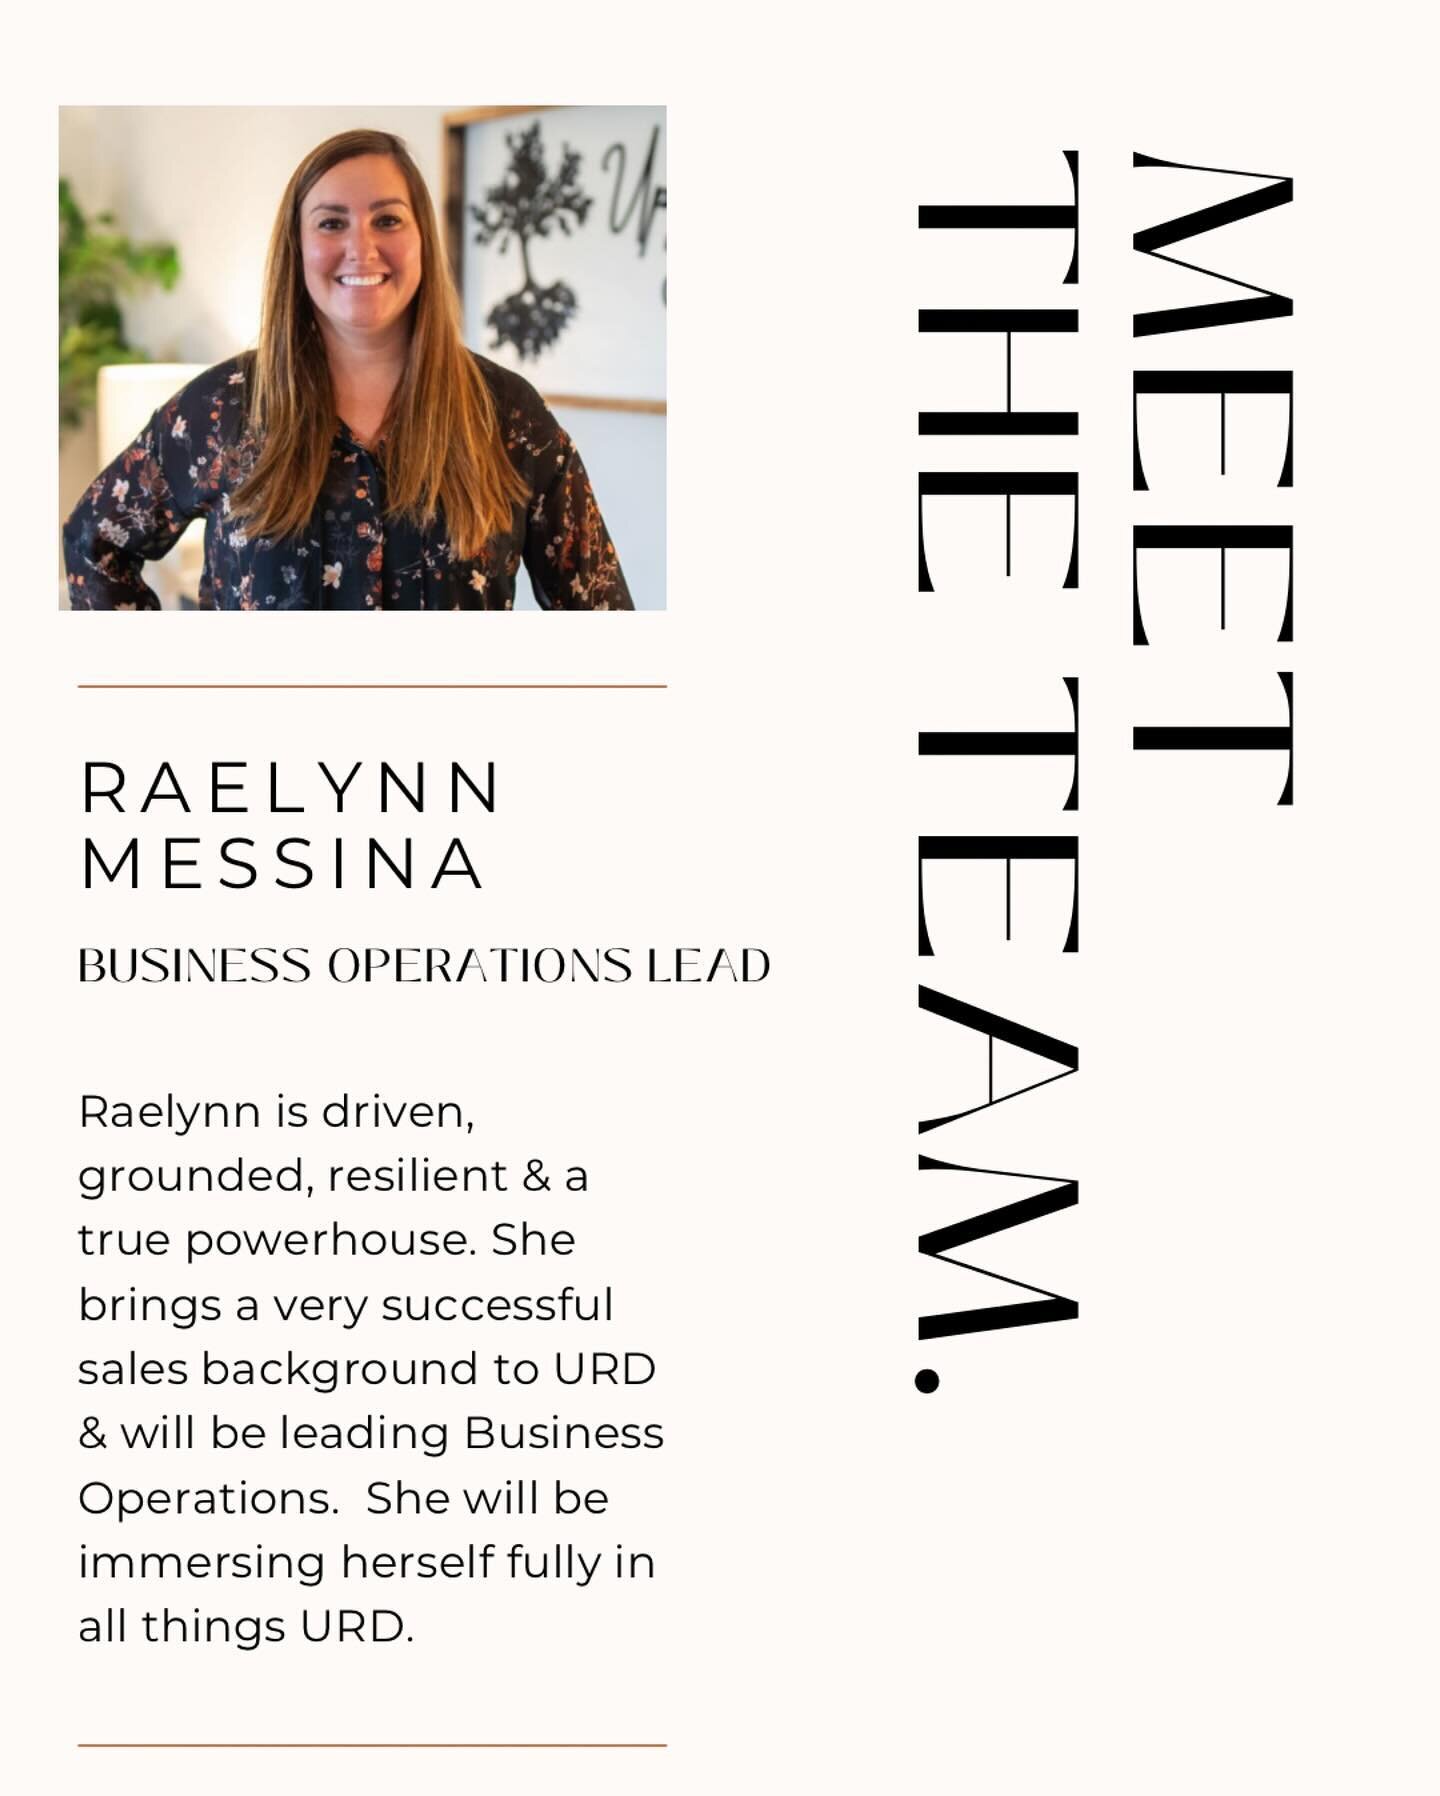 Meet Raelynn! Our paths crossed with Raelynn during college and a treasured friendship has blossomed into so much more over the years. Raelynn is a true powerhouse! She drives hard to meet her goals, she inspires others on her way there, she is enthu